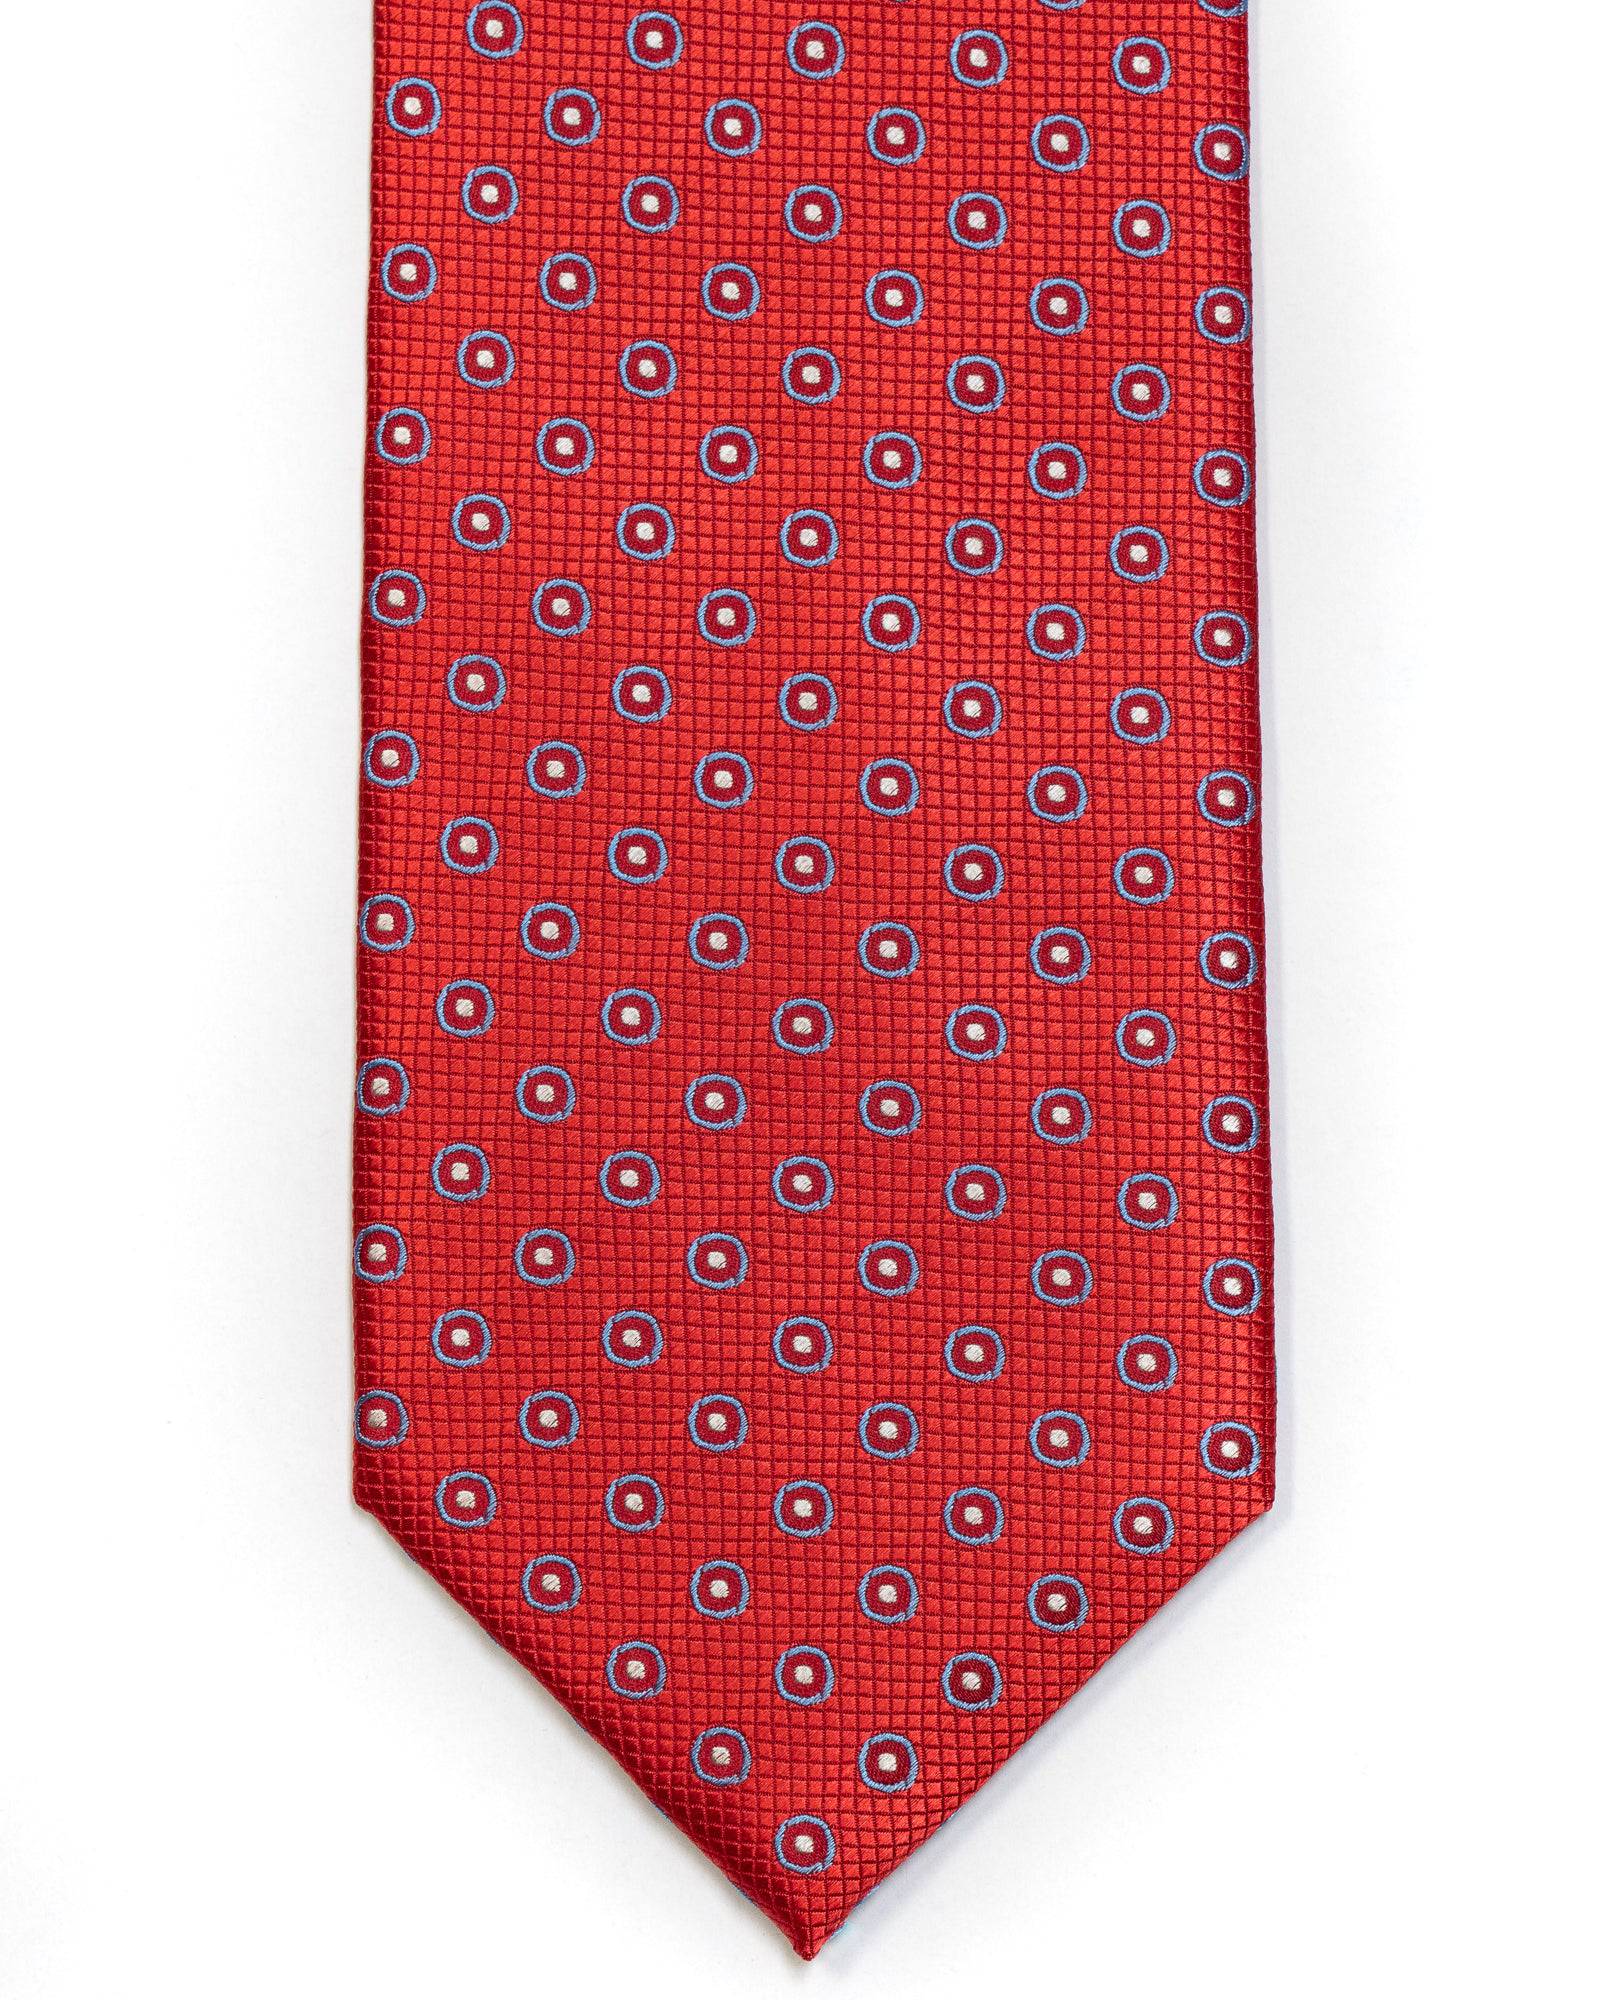 Silk Tie In Red With Blue Circle Foulard Design - Rainwater's Men's Clothing and Tuxedo Rental